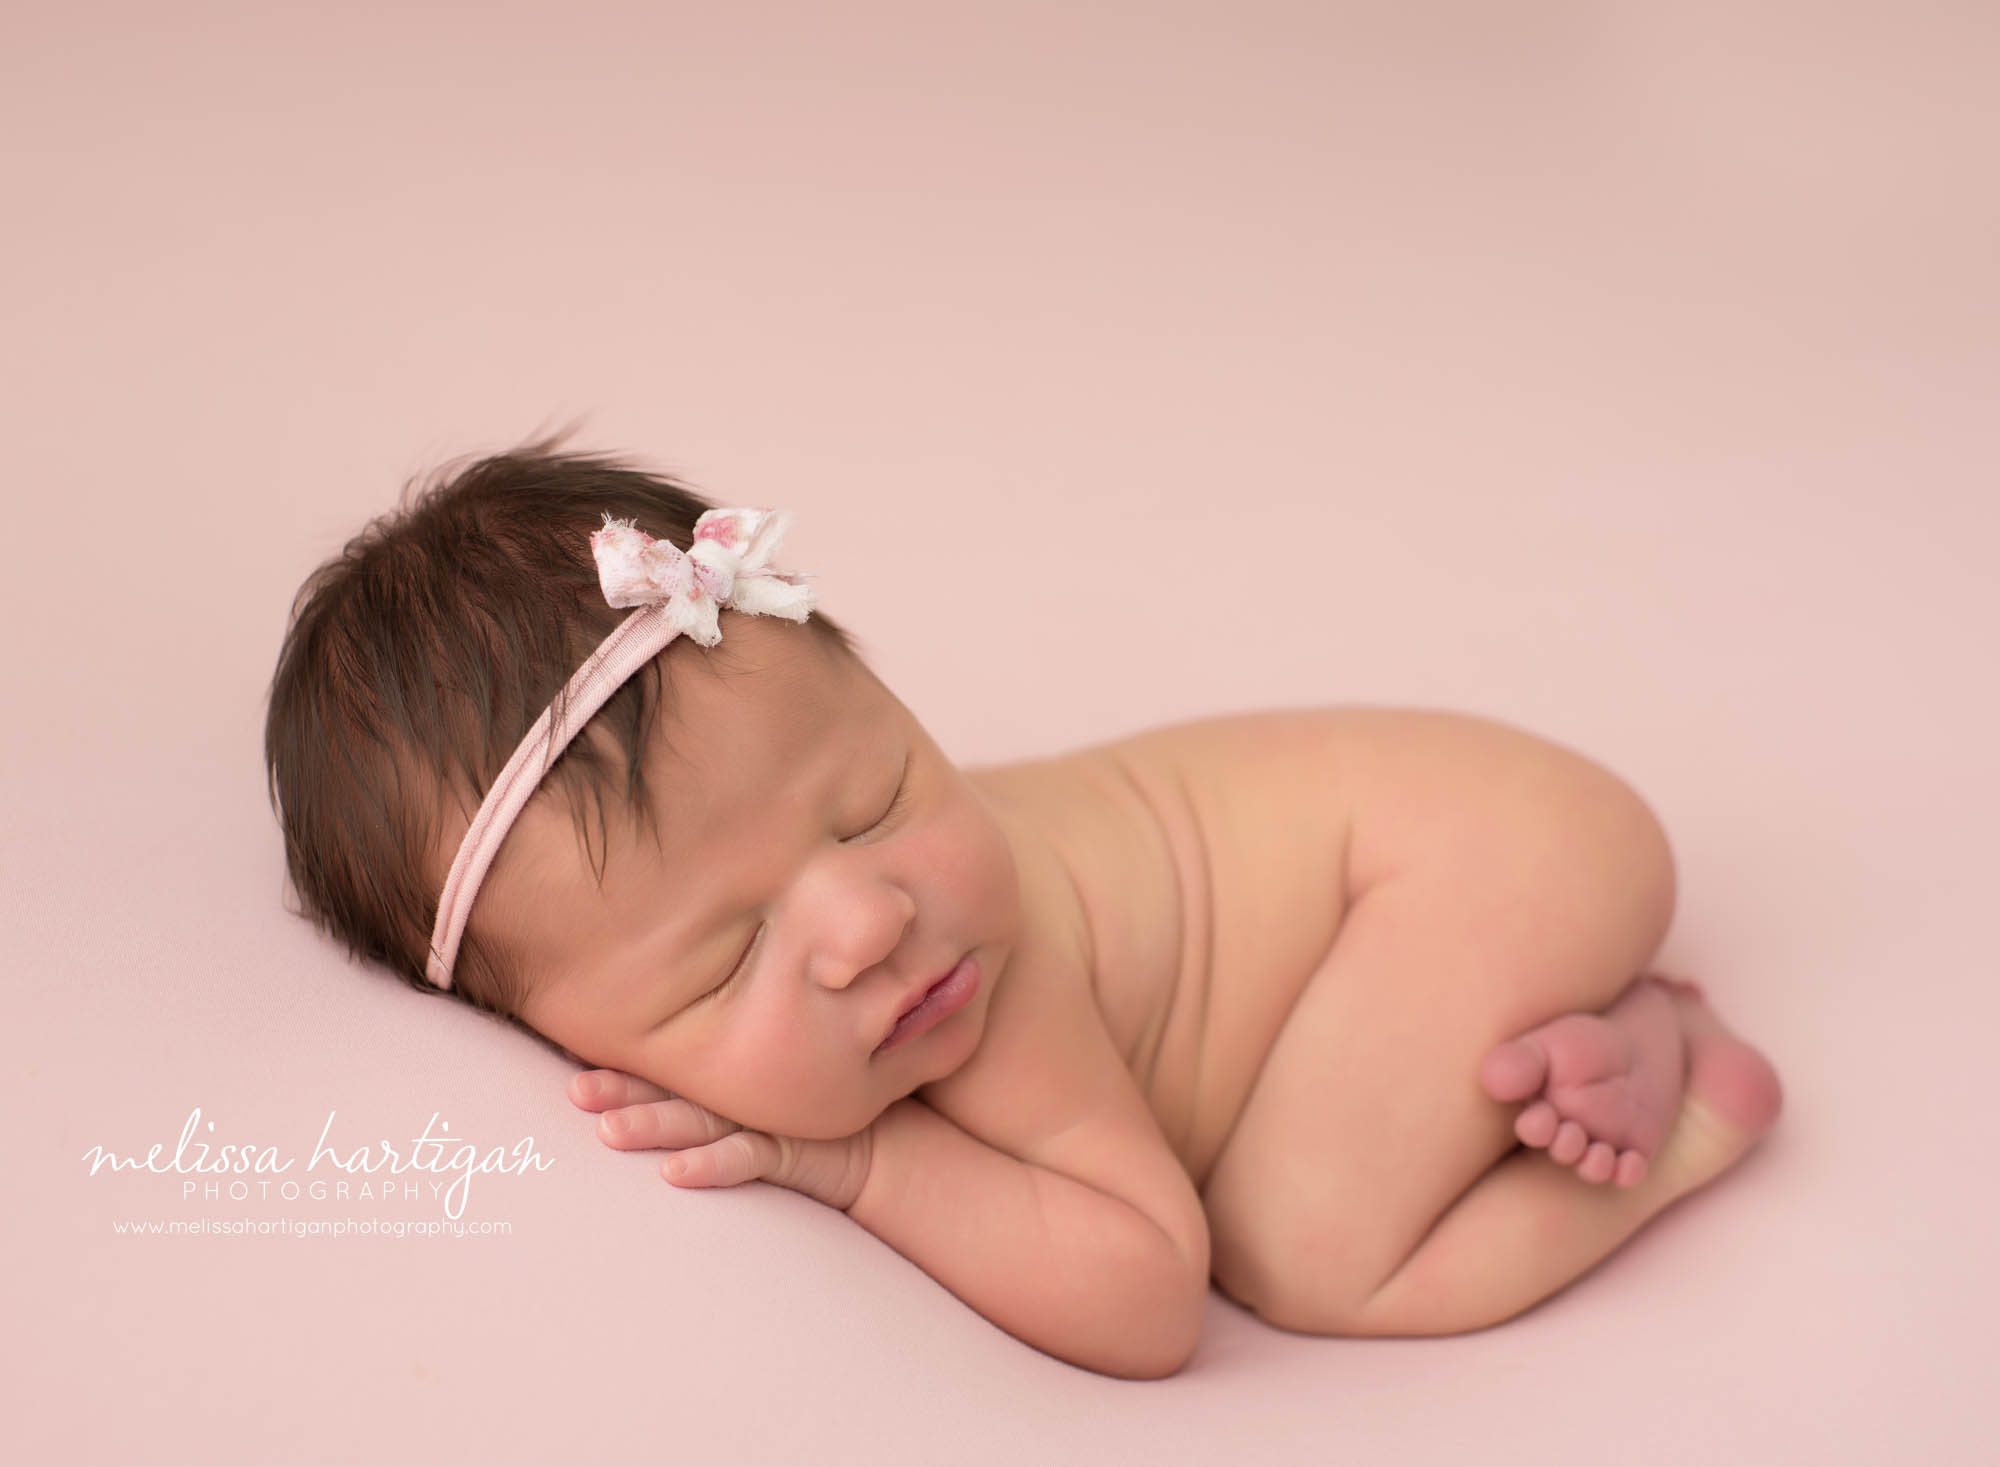 newborn baby girl posed on side bump up with pink bow headband